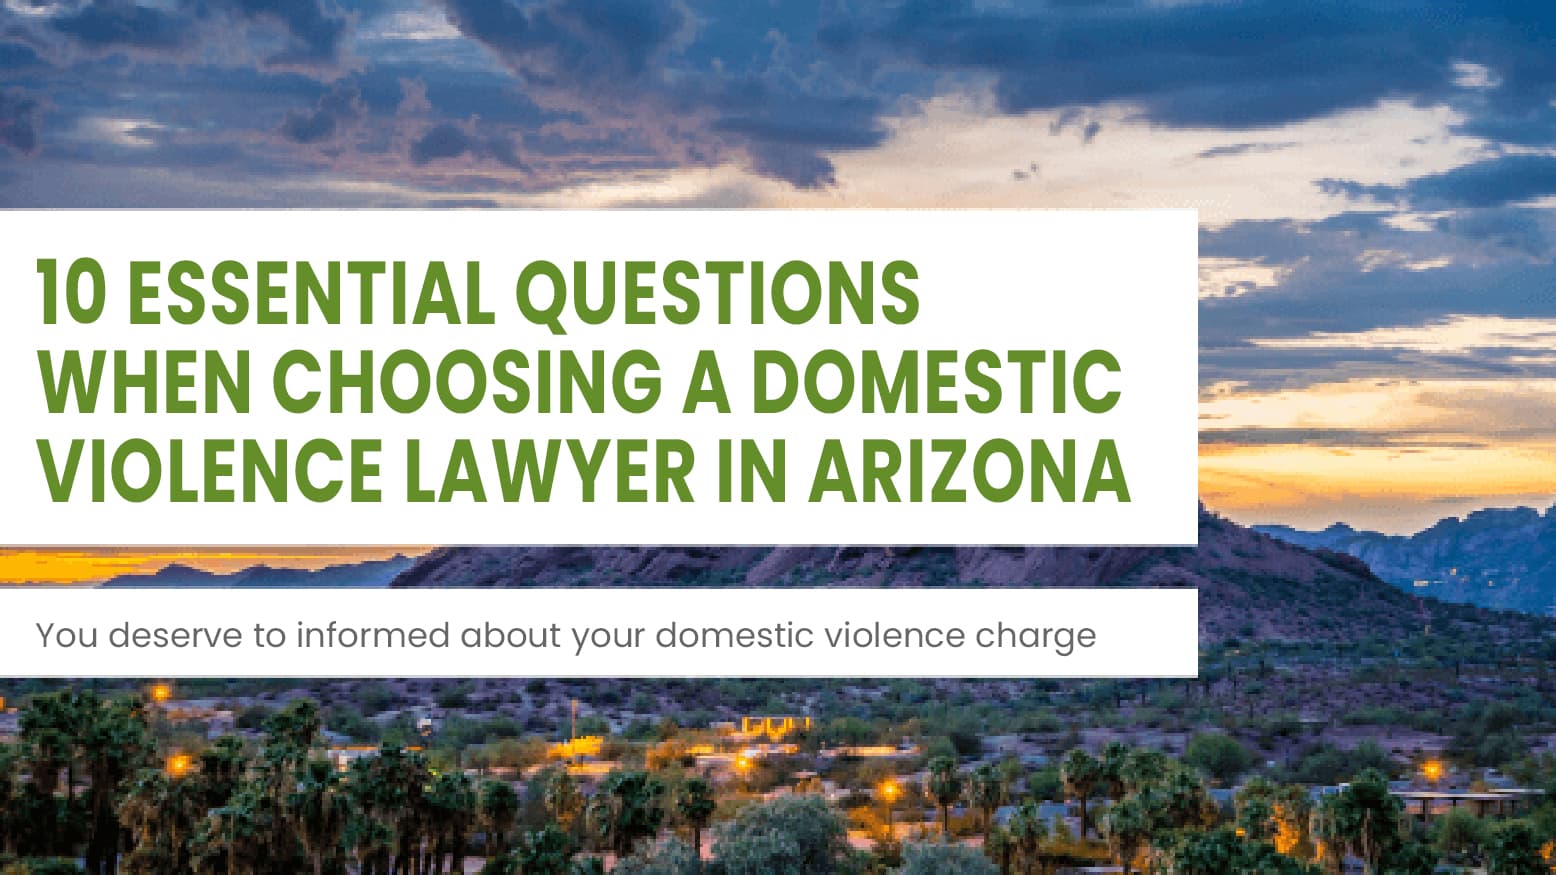 image contains text, 10 Essential Questions When Choosing a Domestic Violence Lawyer in Arizona